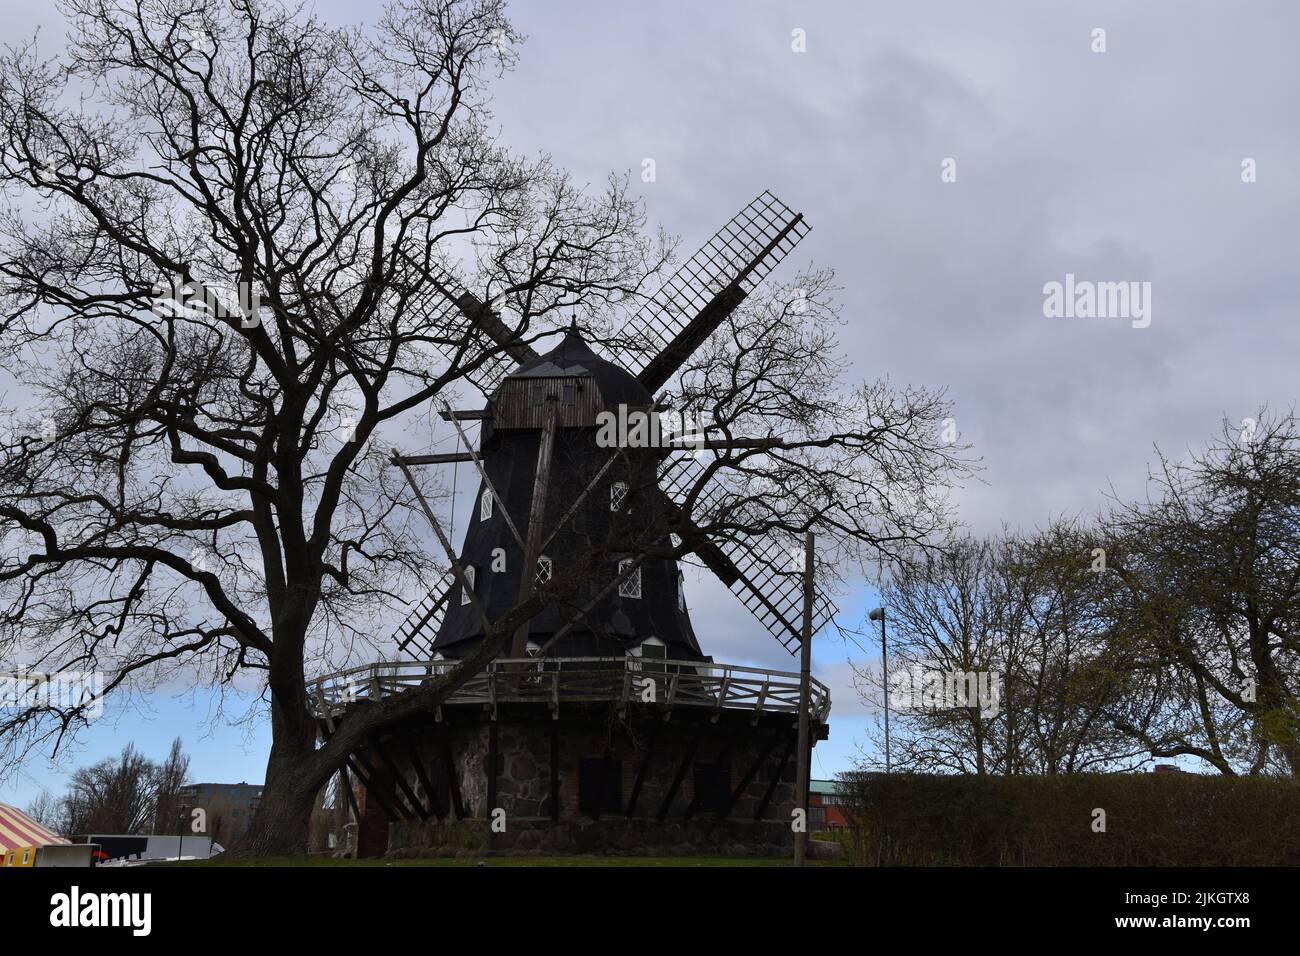 An old style windmill surrounded by dry trees under a cloudy sky in Malmoe Stock Photo